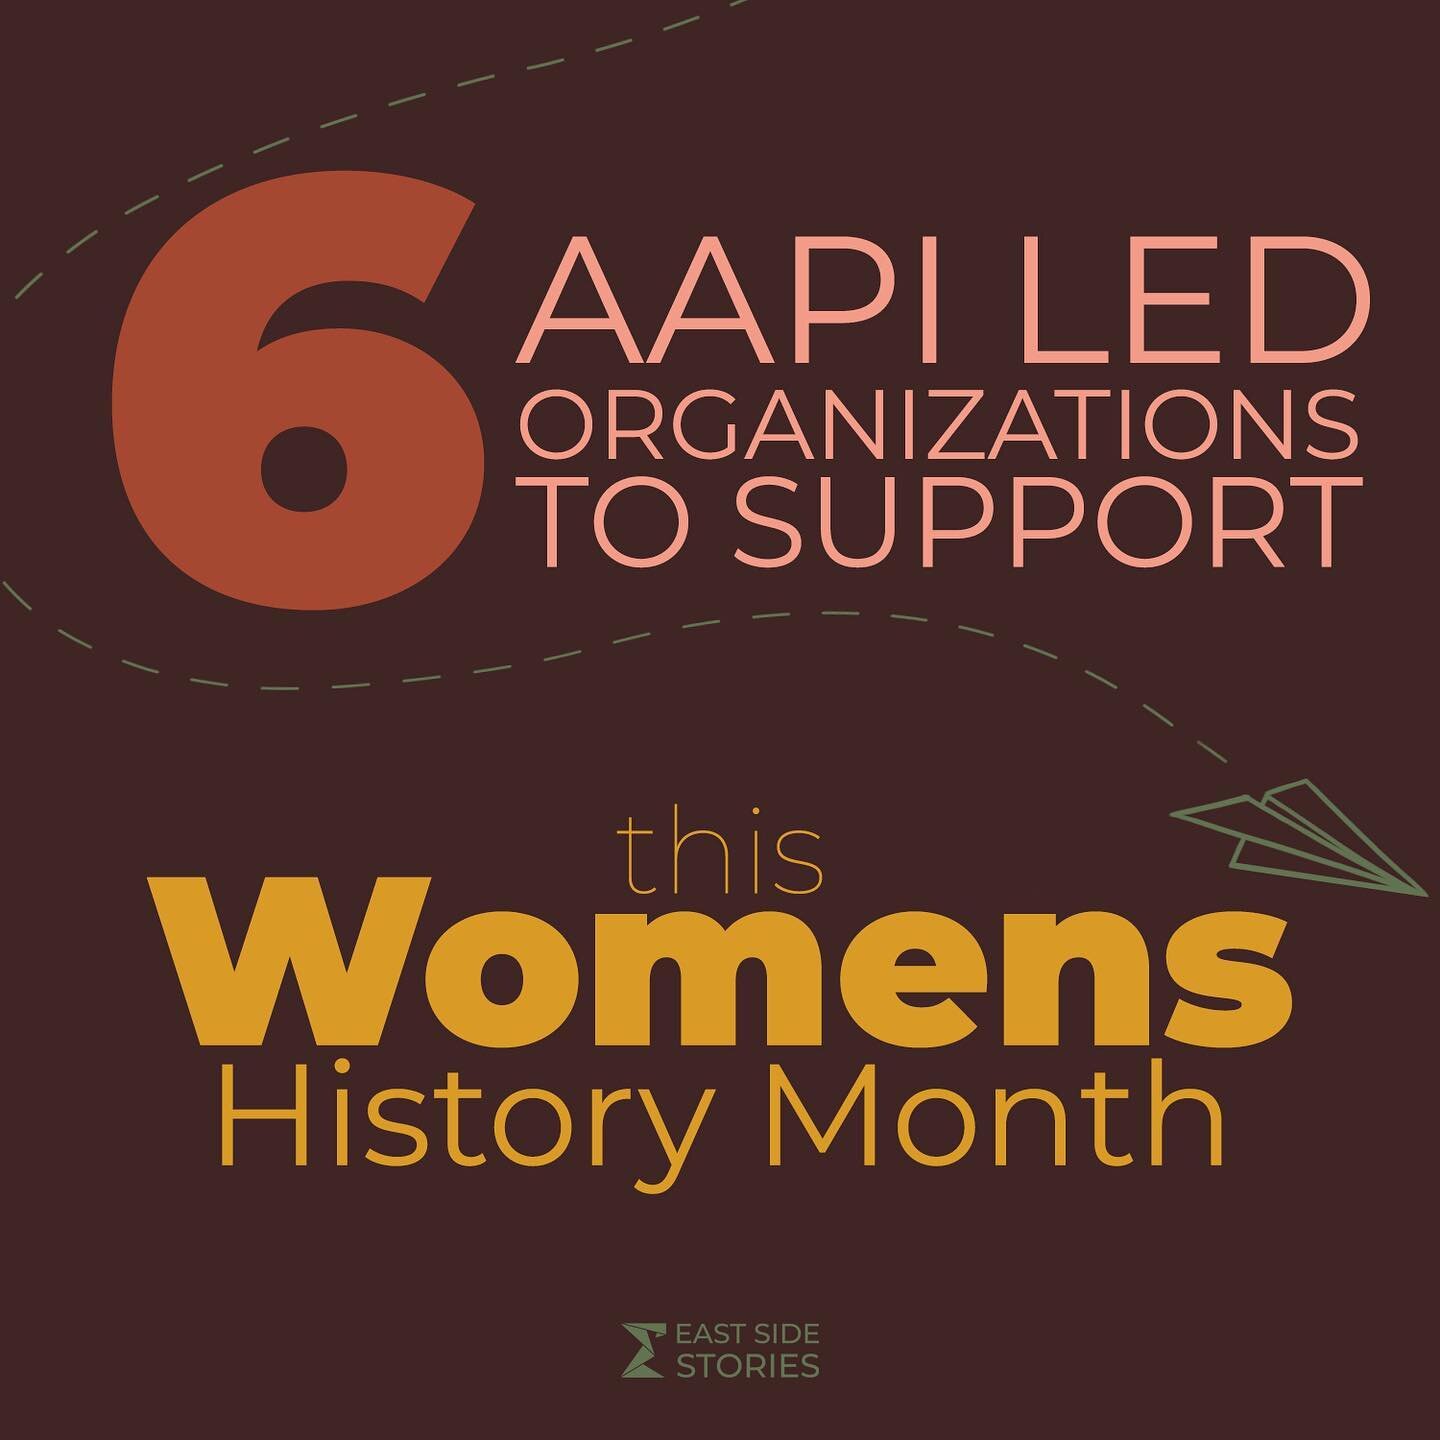 SWIPE 👉🏼 to learn more about these impactful organizations!

@jahajee_sisters 
@mottstreetgirls 
@southqueenswomensmarch 
@qwavenyc 
@aafc.nyc 
@thinkchinatown 

Support these groups by donating, volunteering, and following!

🚨 SIGN UP 🚨 for the 